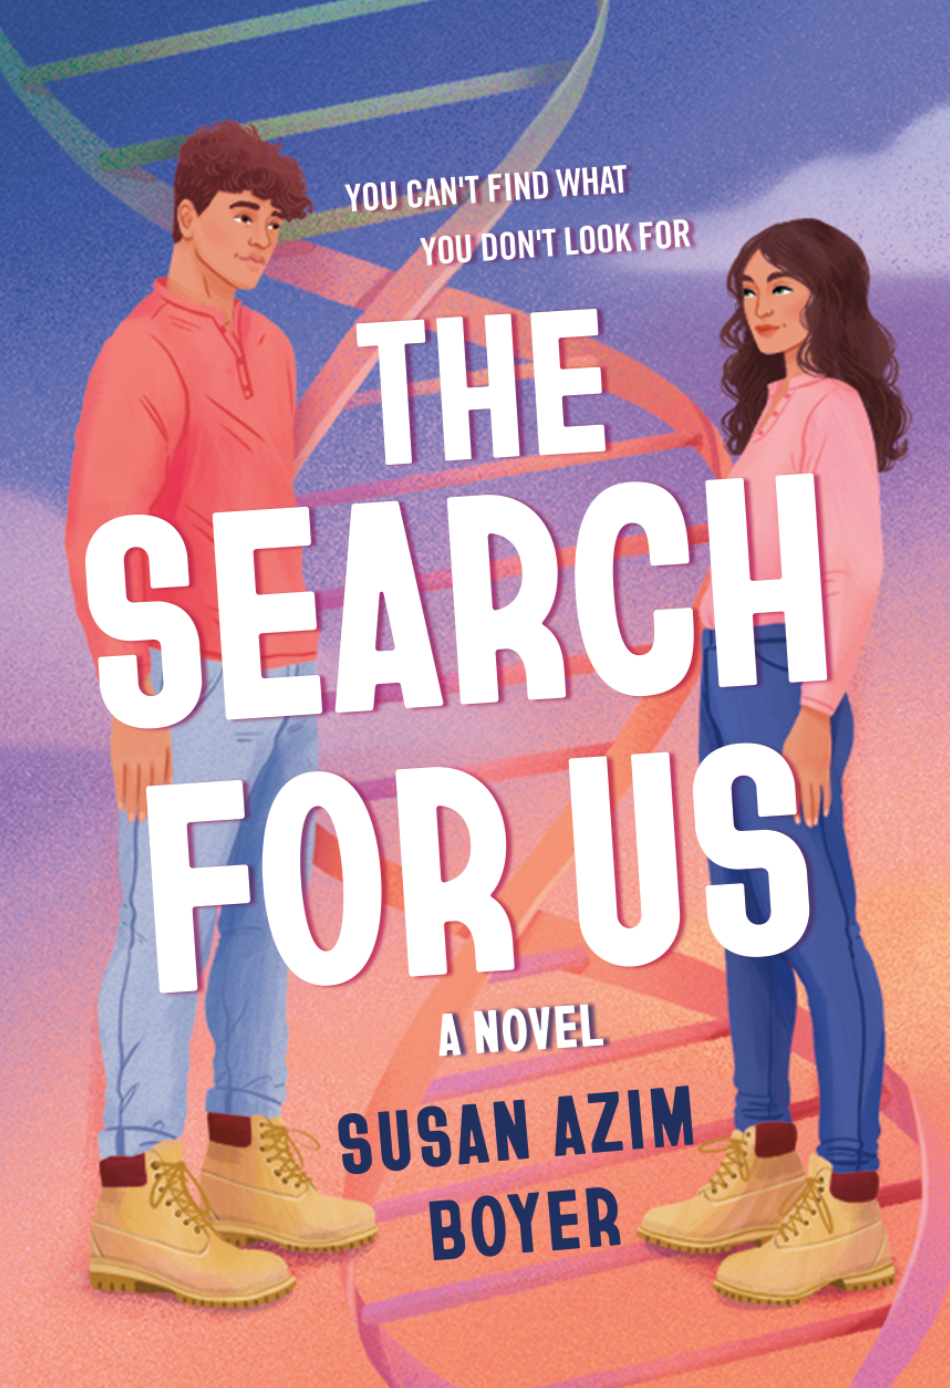 I’M SORRY, MOM: How Writing My YA Novel Helped Me Better Understand Her Alcohol Addiction, a guest post by Susan Azim Boyer